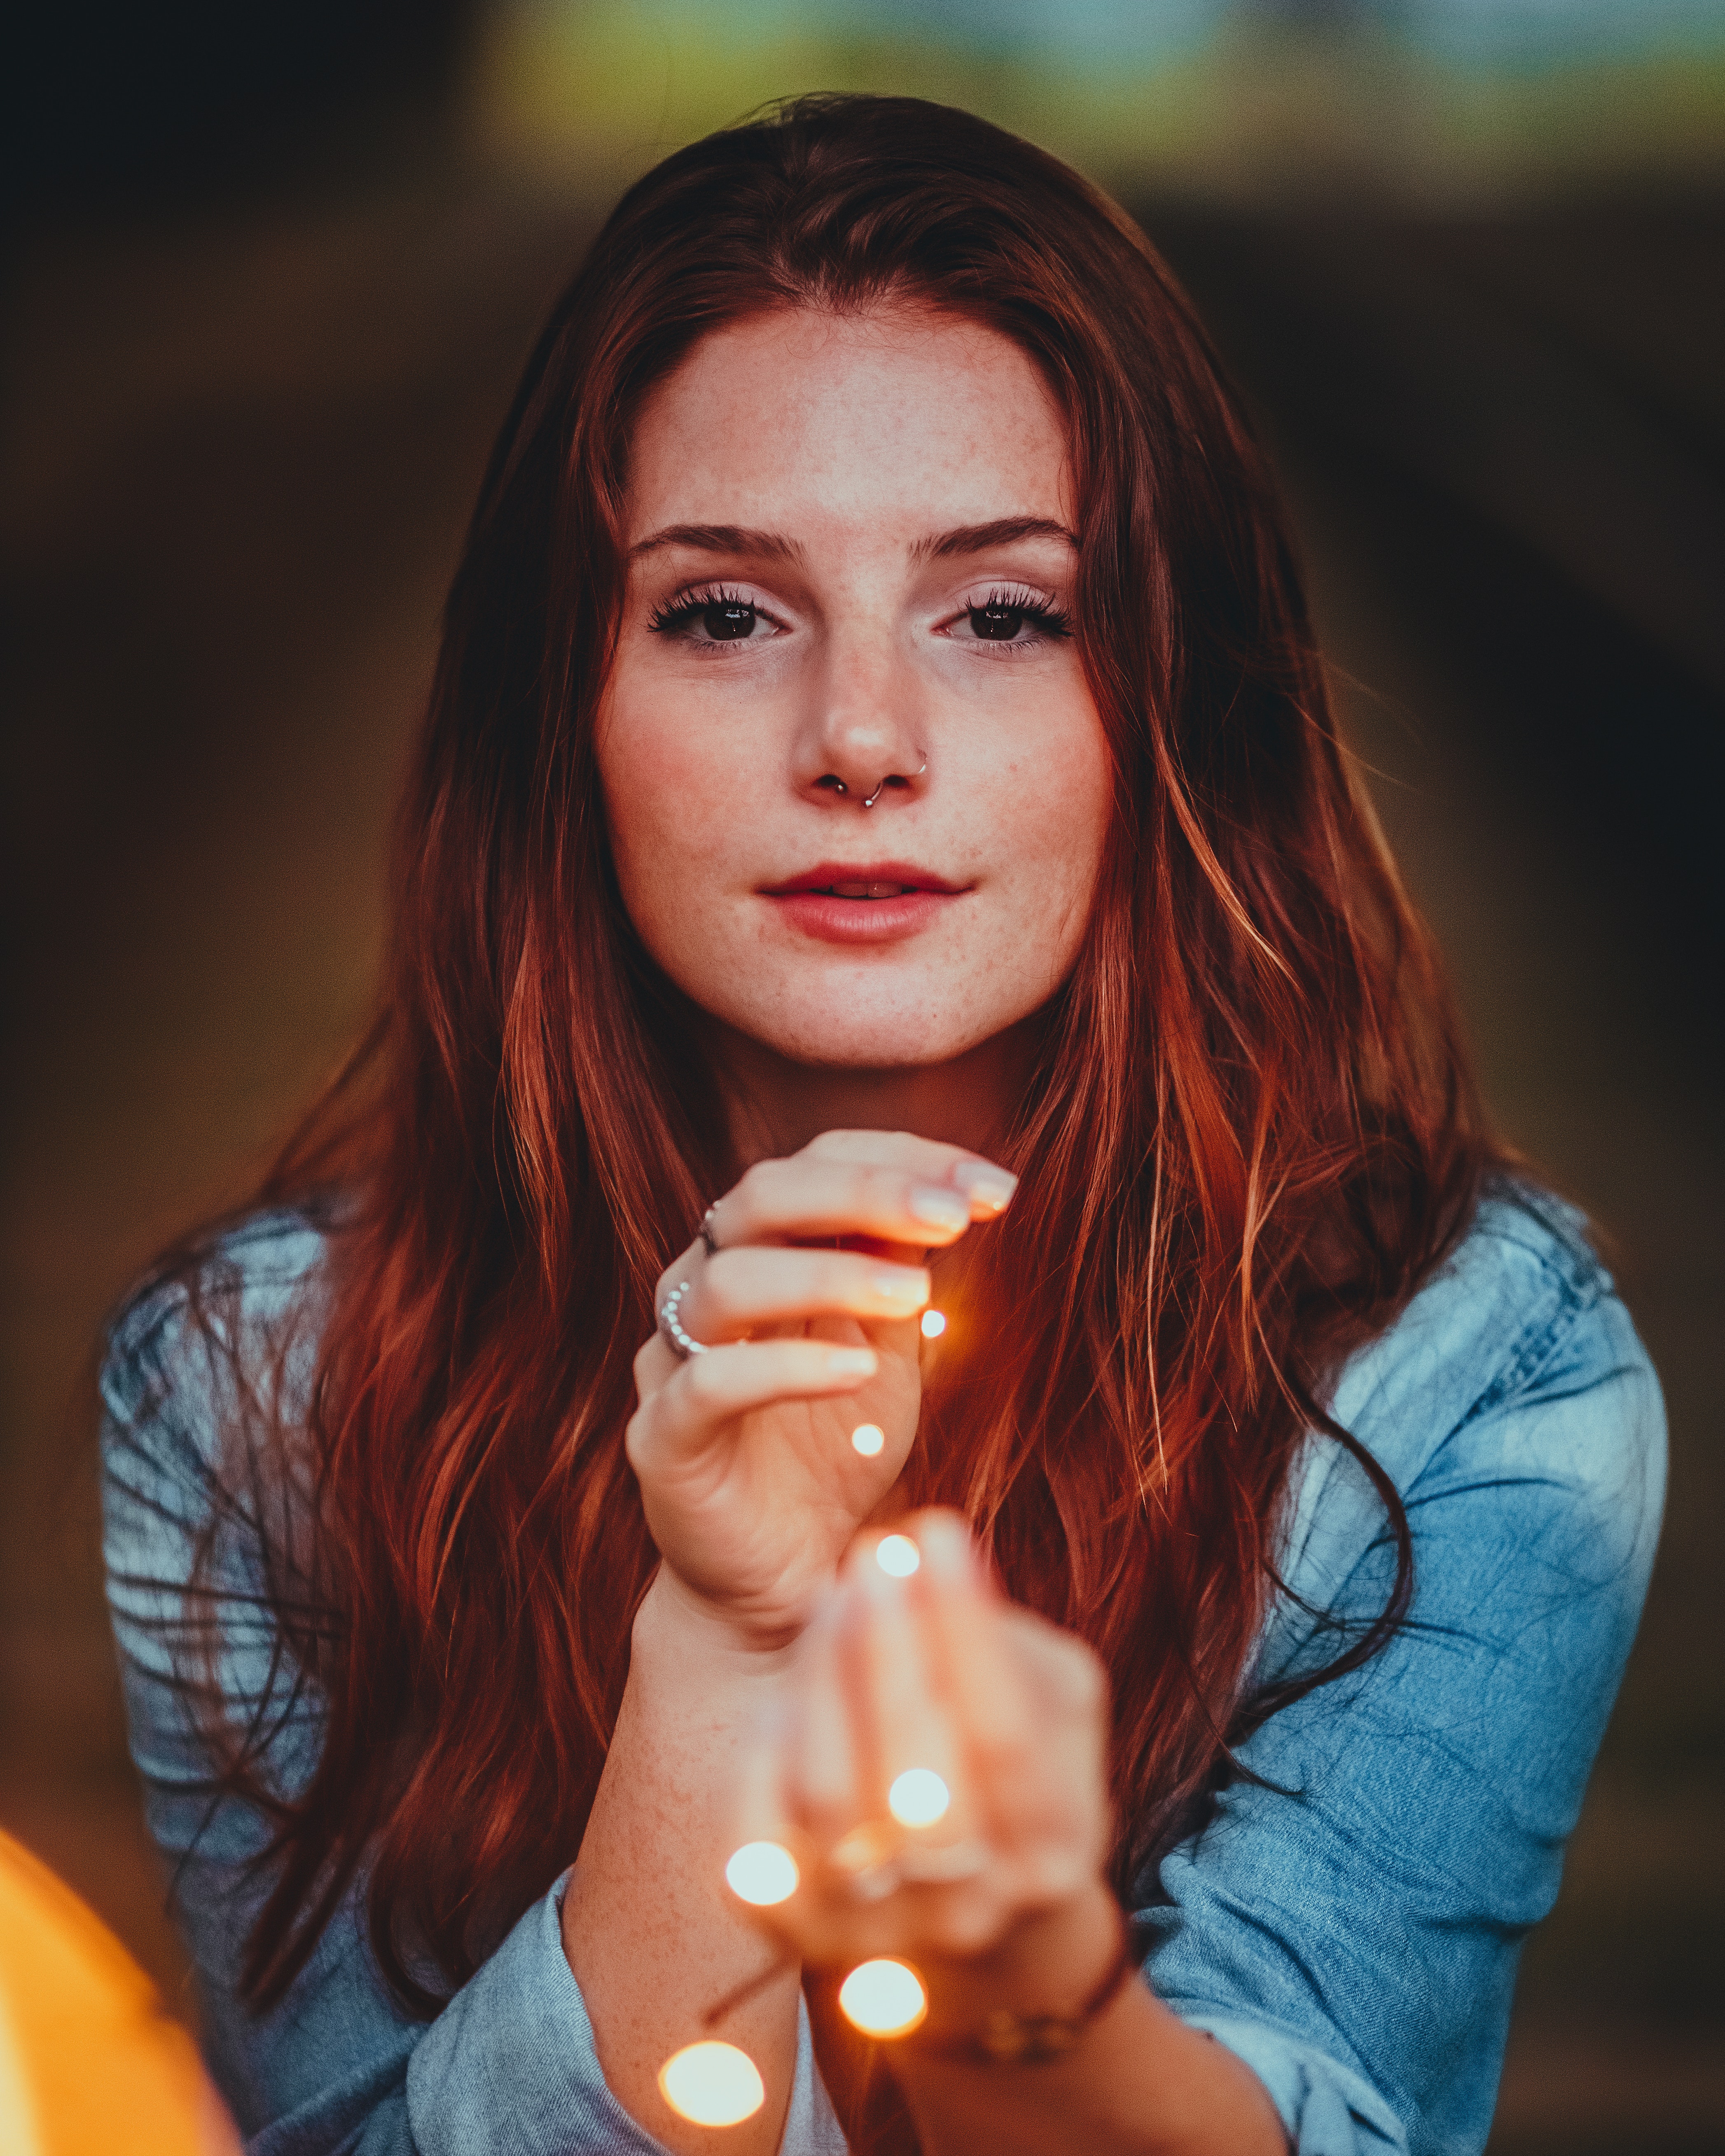 A woman holding fairy lights. | Source: Pexels